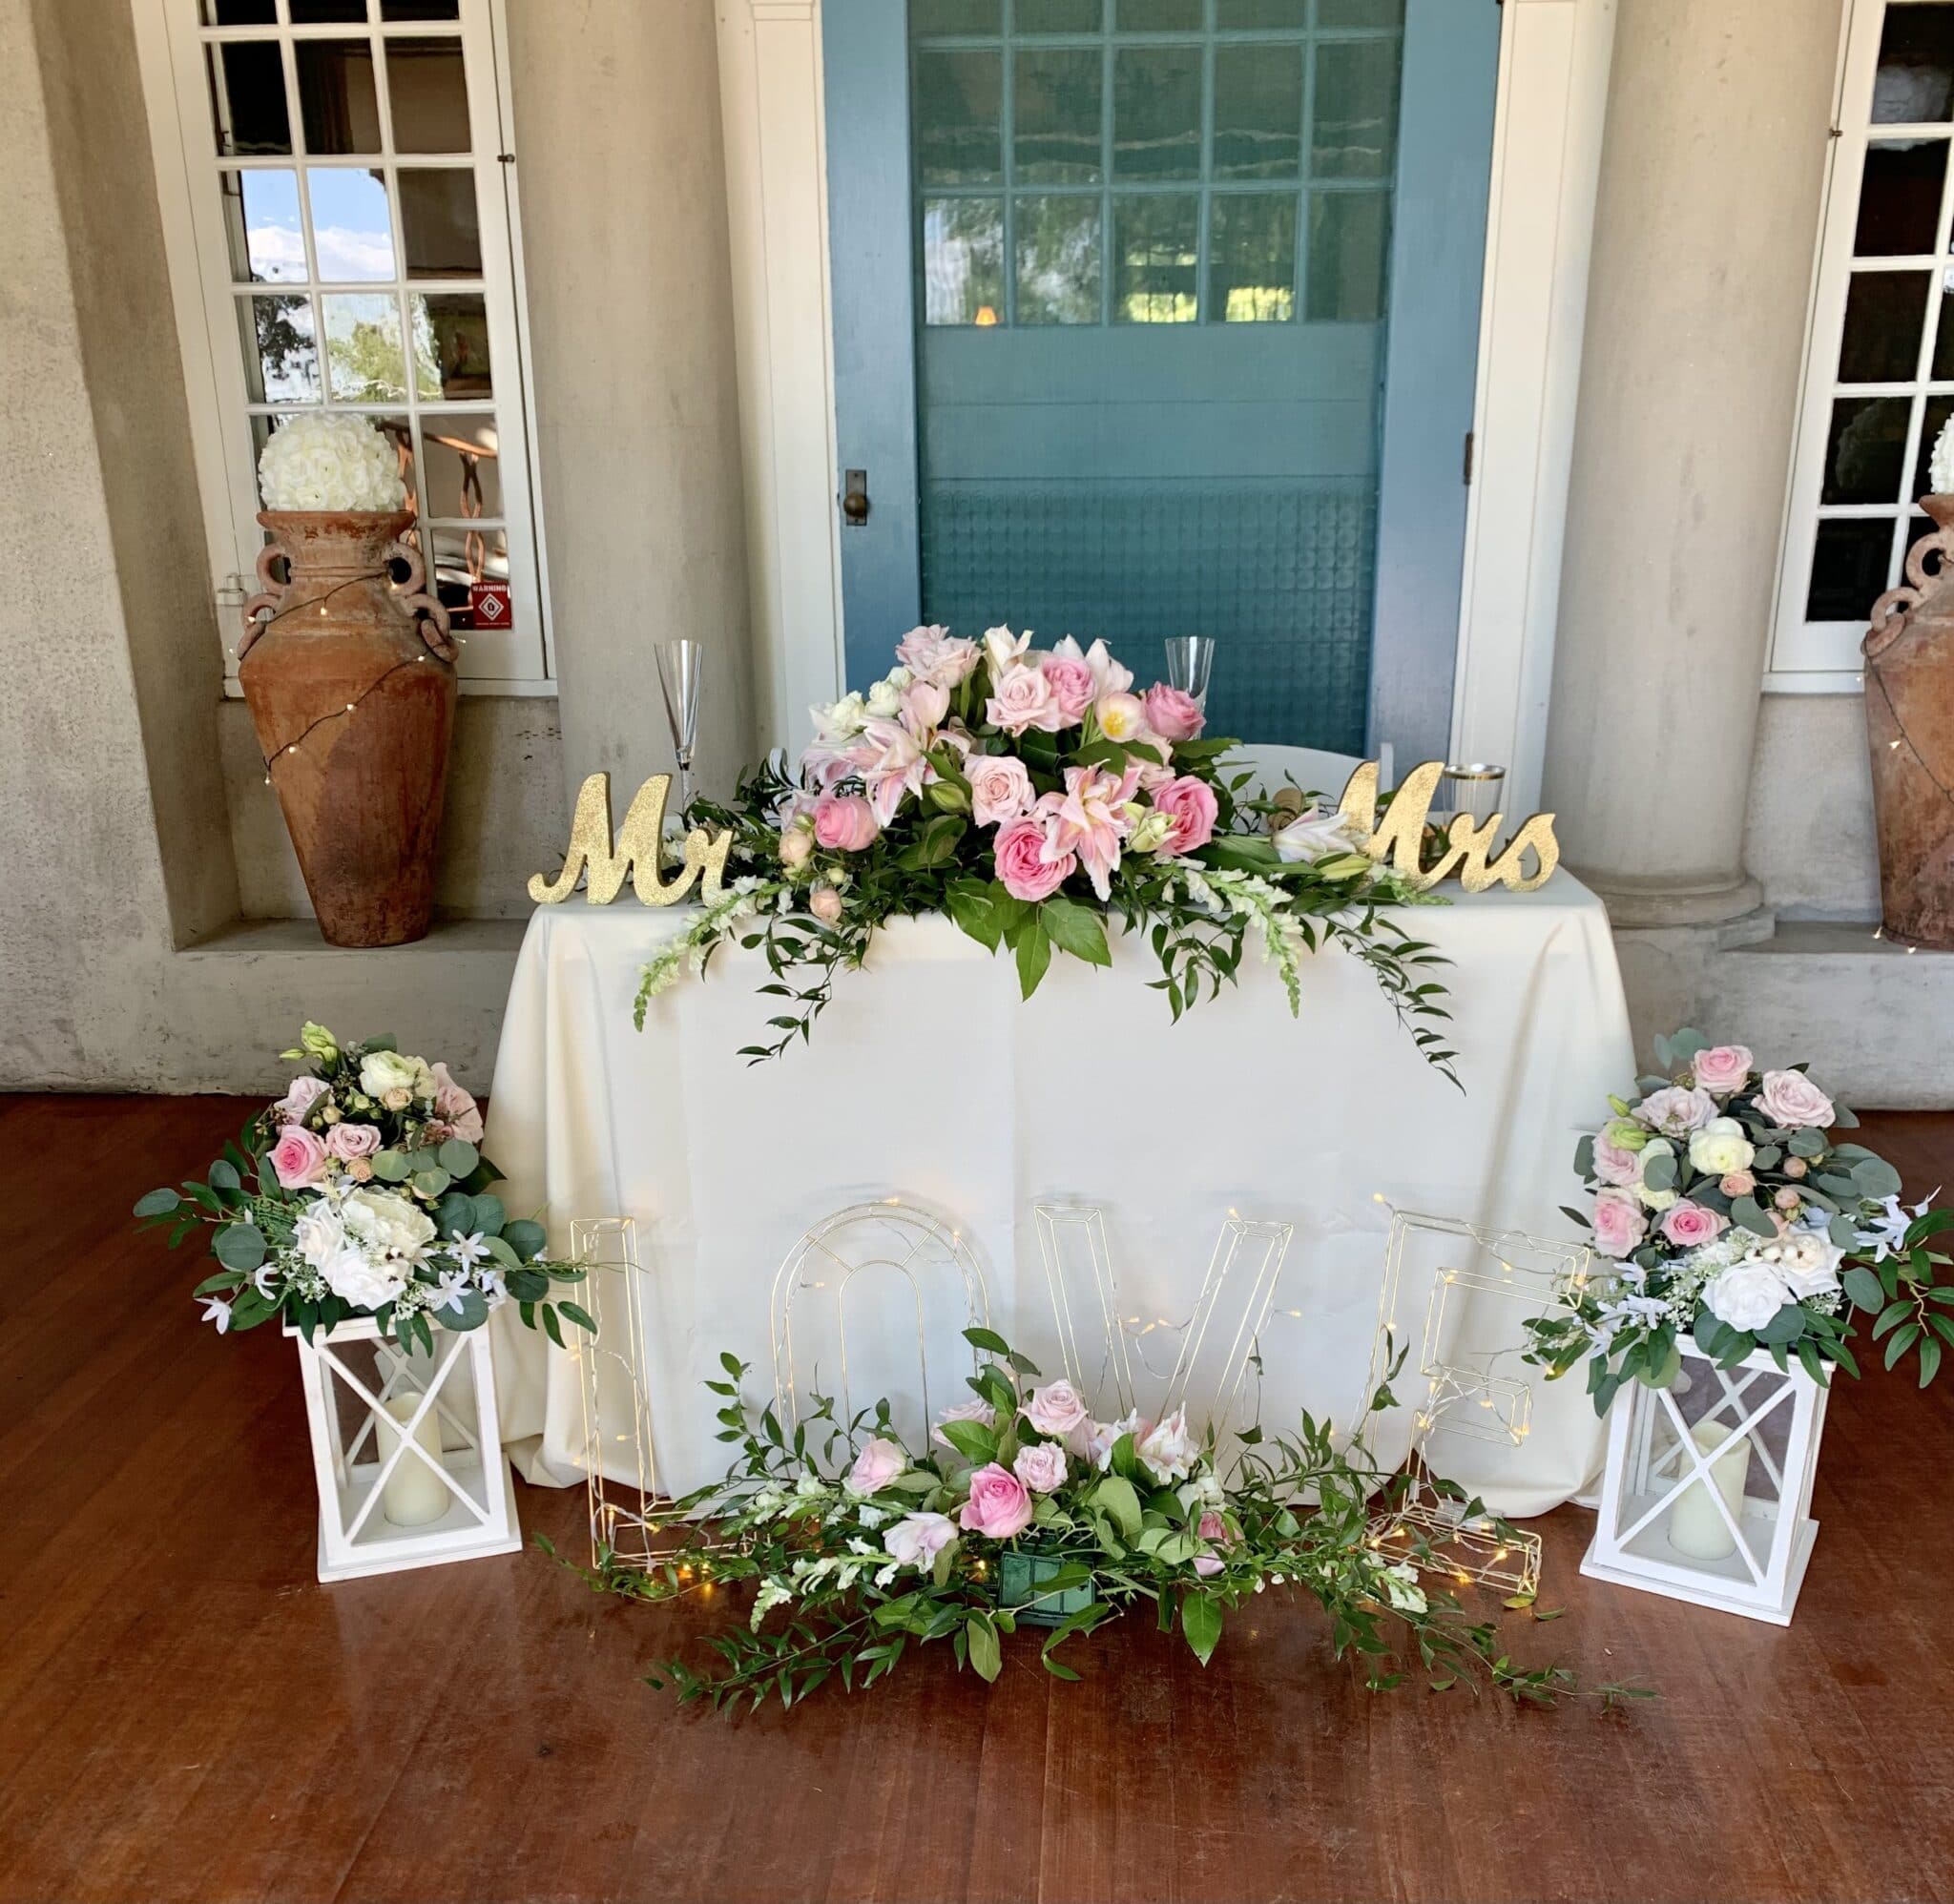 sweetheart table decorated with flowers and candles